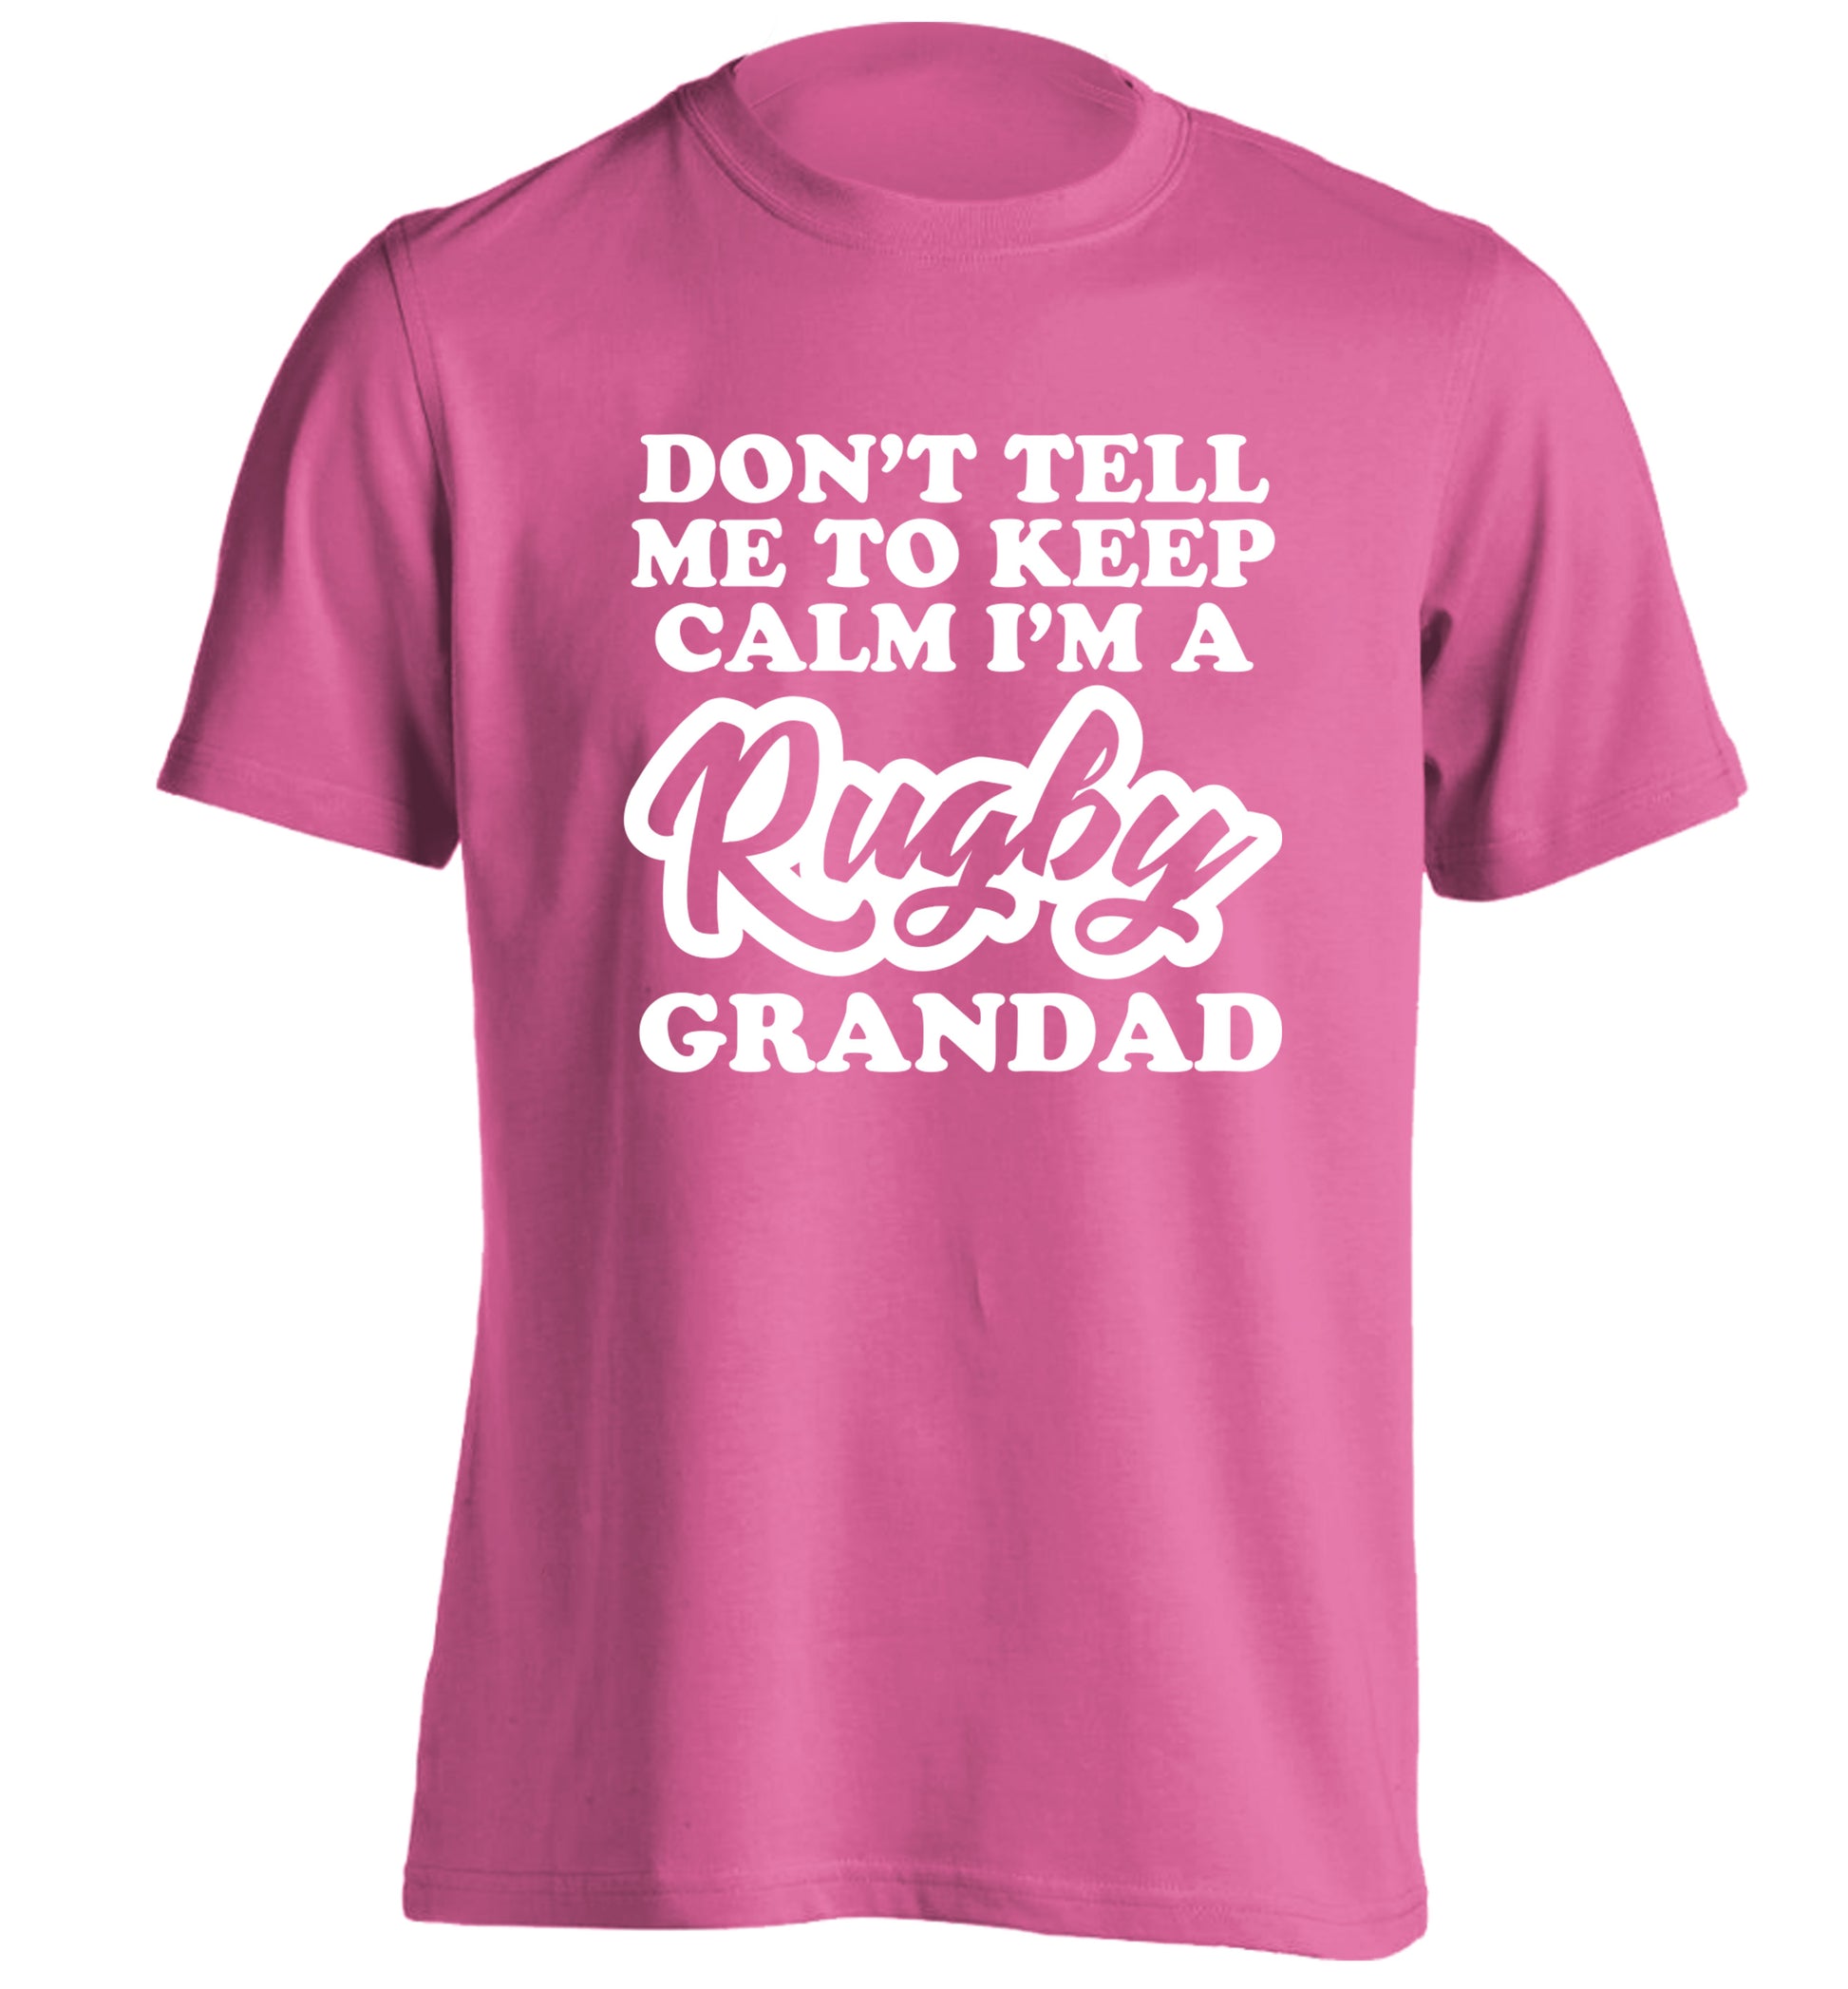 Don't tell me to keep calm I'm a rugby dad adults unisex pink Tshirt 2XL